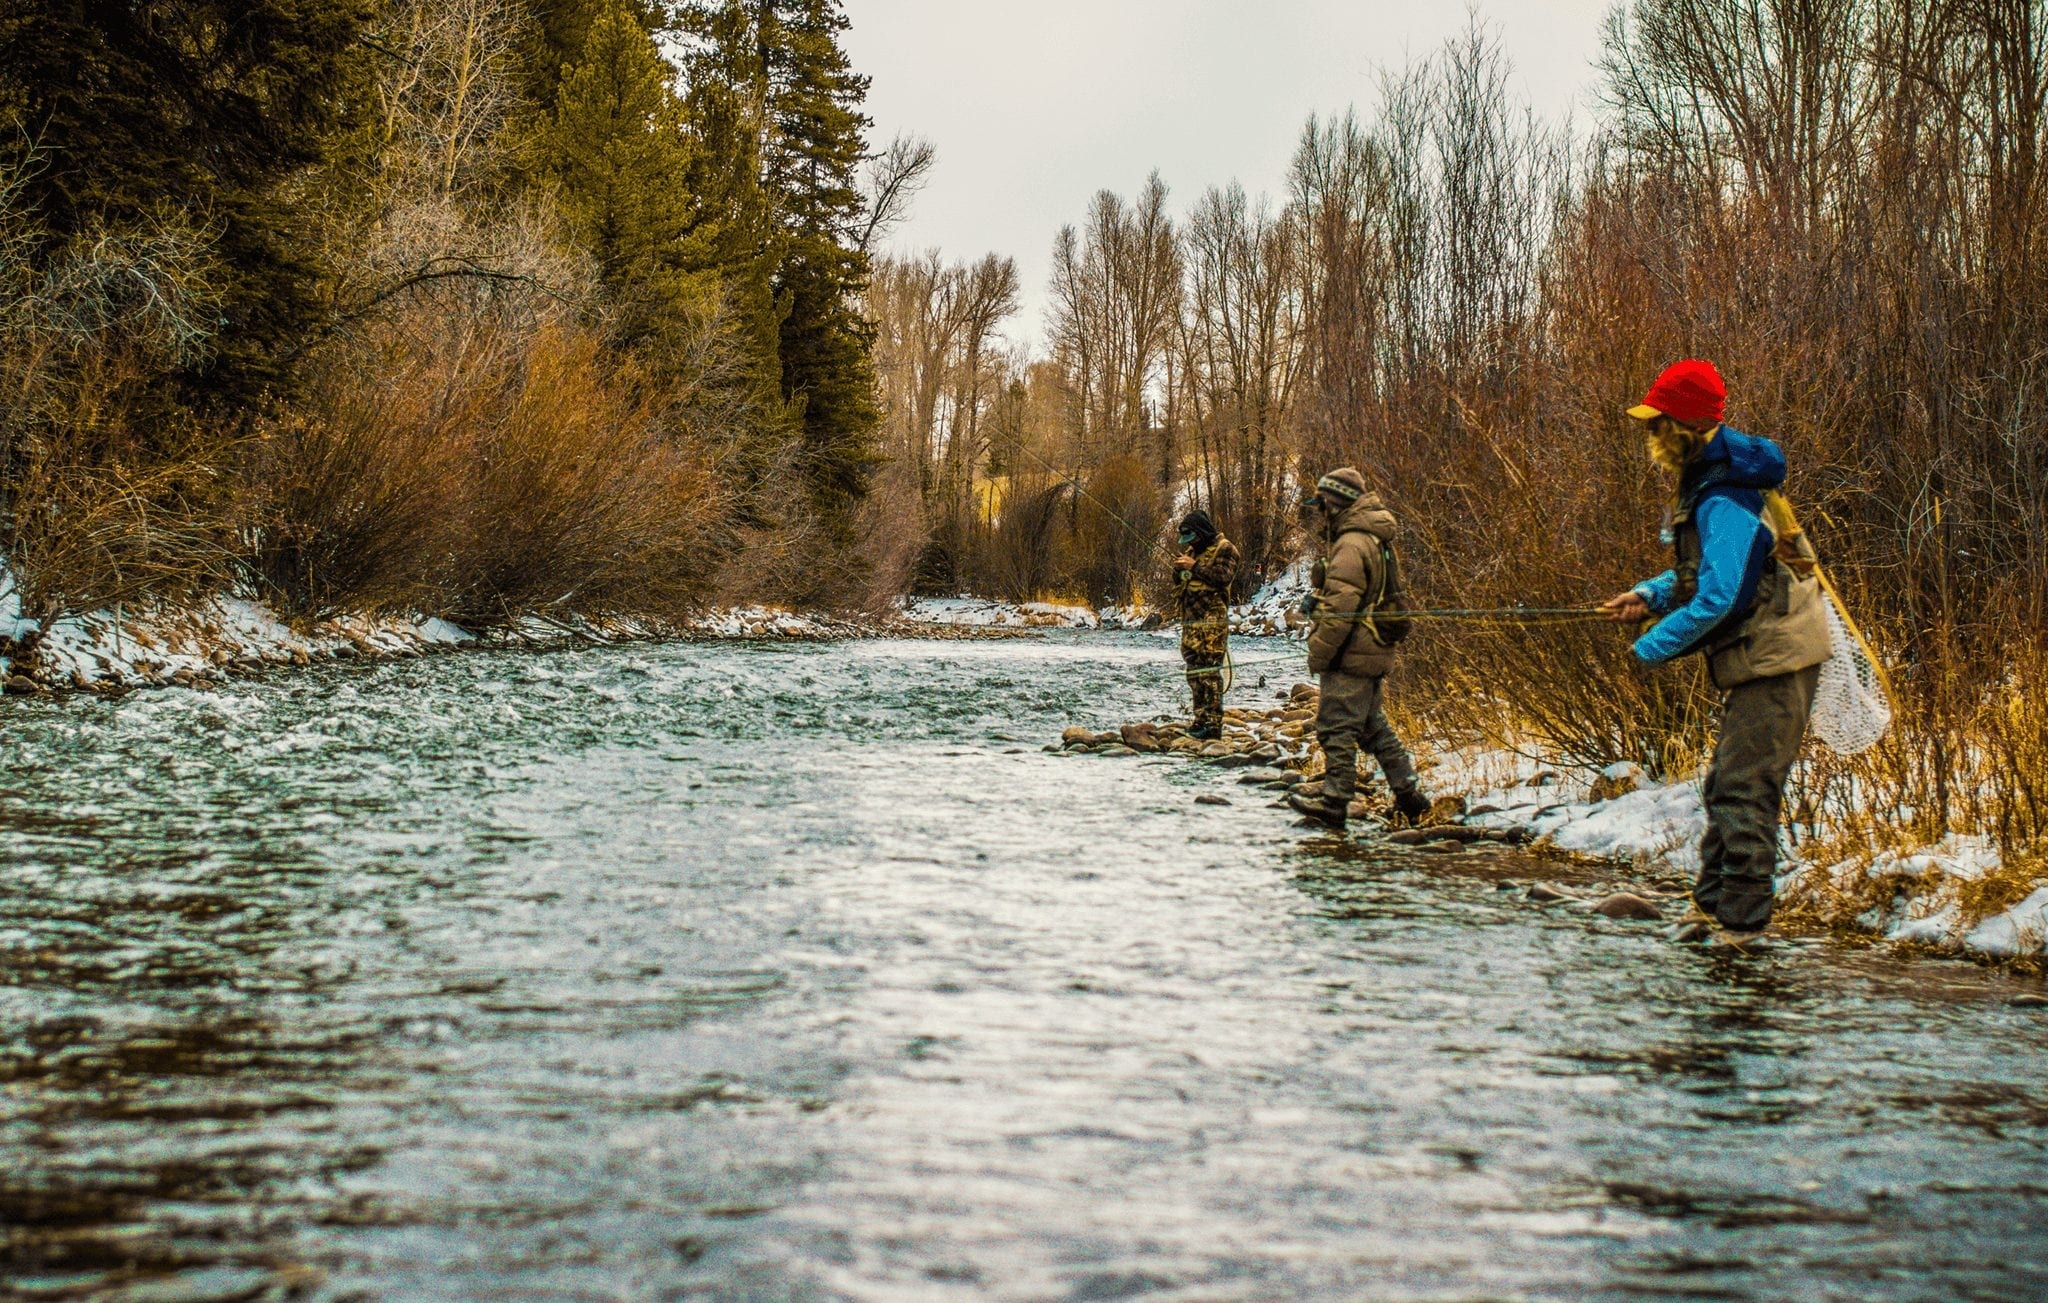 A group fly fishing in the river during winter in Breckenridge